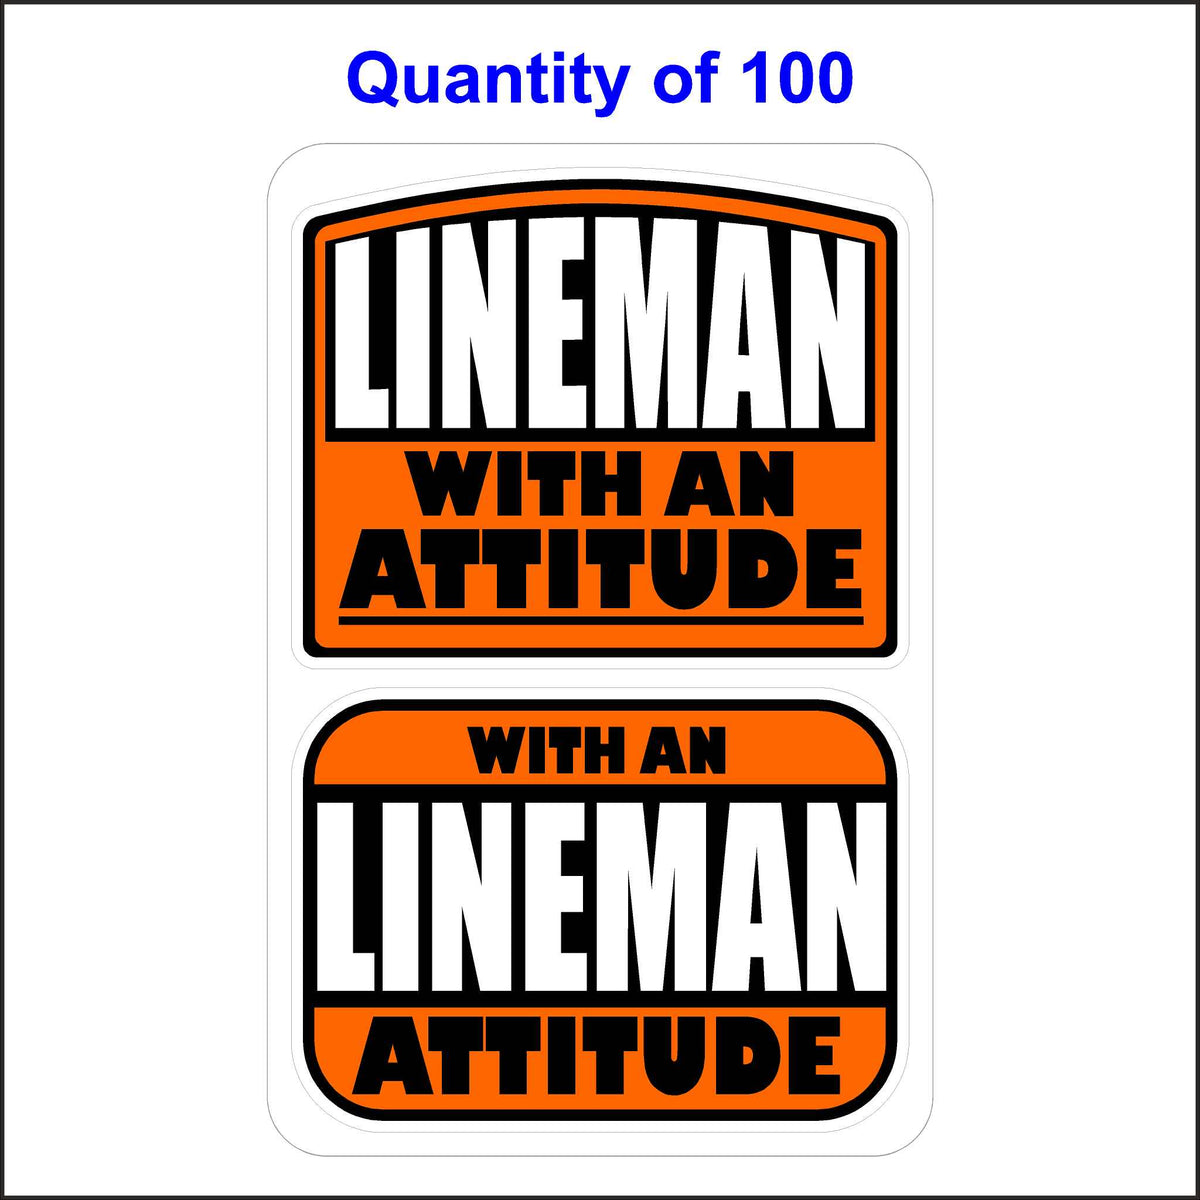 Lineman With An Attitude Stickers 100 Quantity.